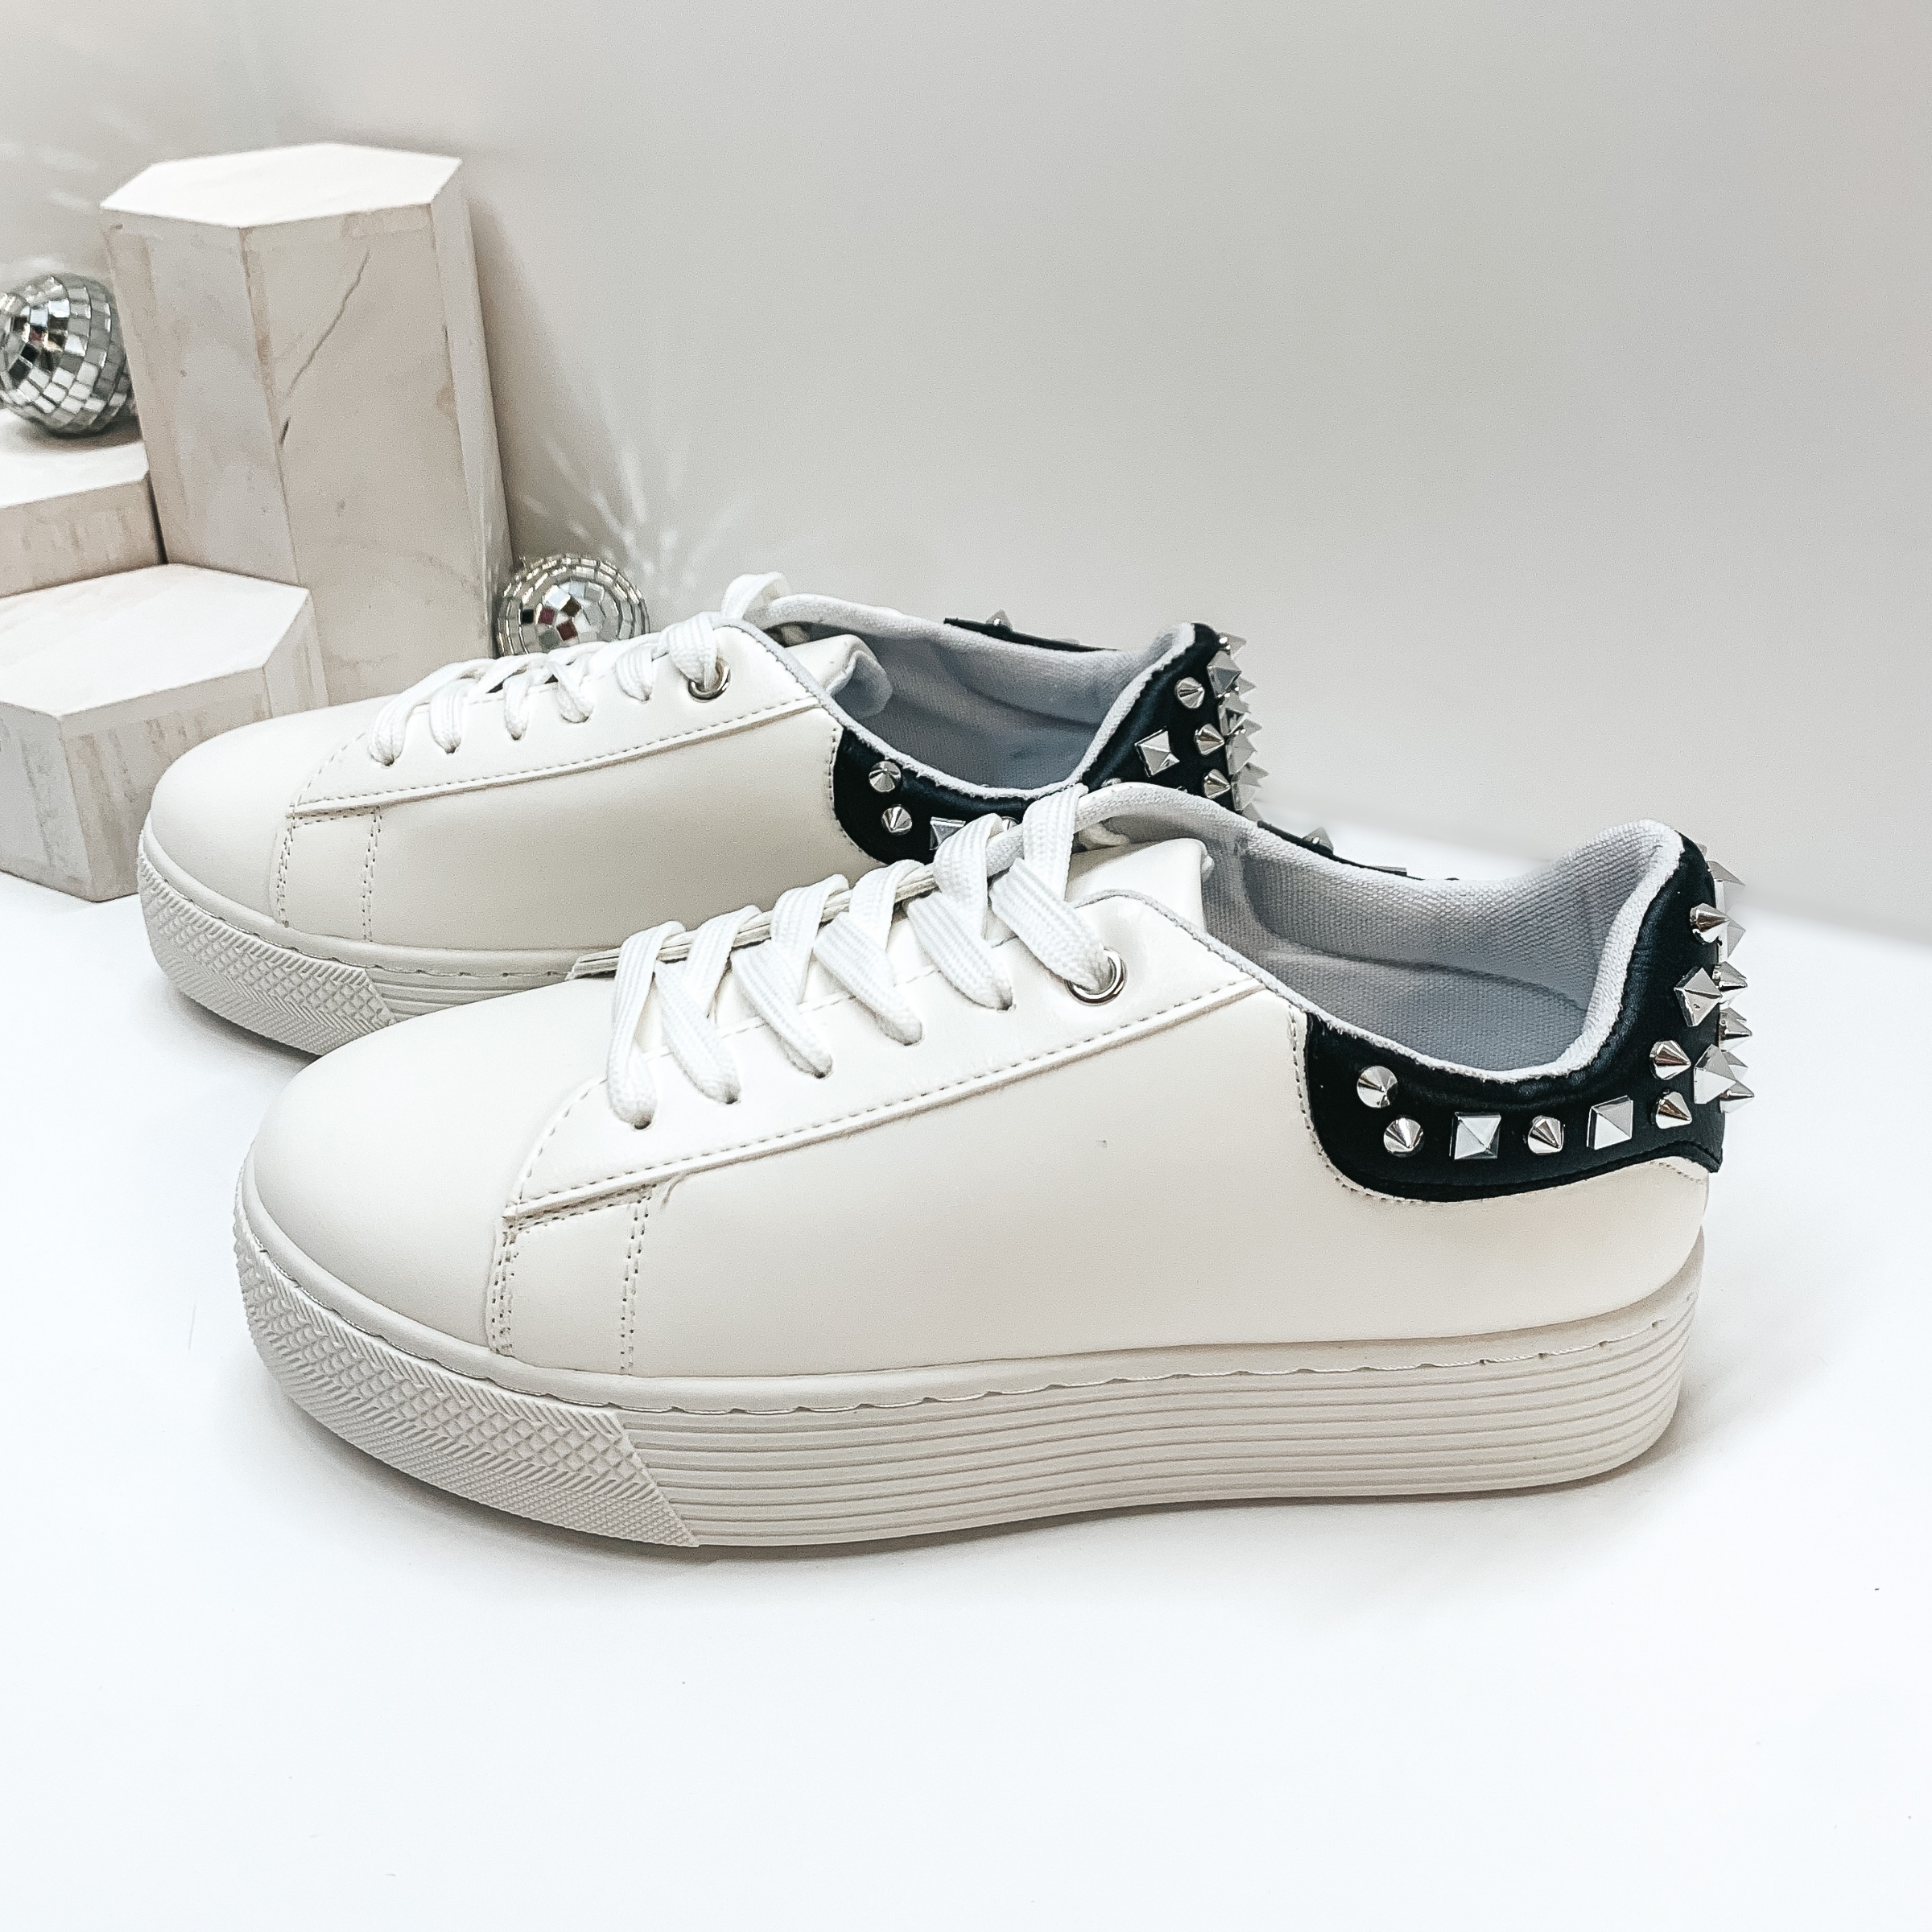 Studded Chic Lace Up Black Heel Platform Sneakers in White - Giddy Up Glamour Boutique